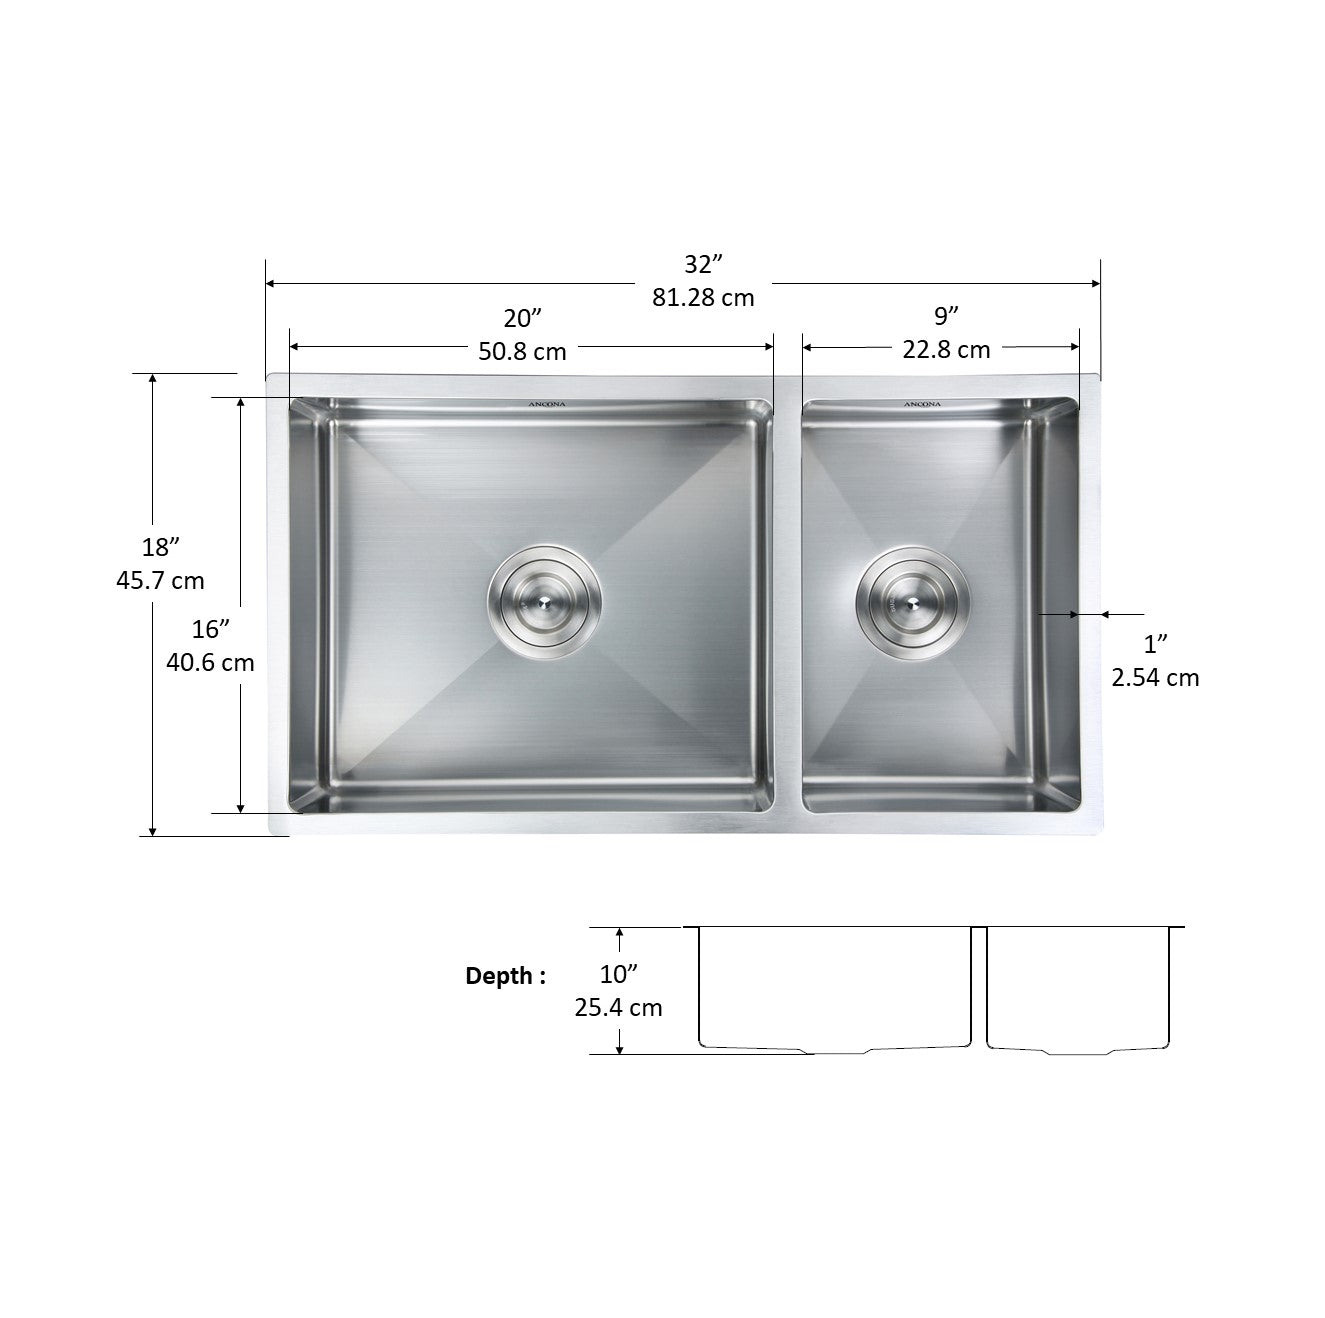 Prestige Series Undermount Stainless Steel 32 in. 70/30 Double Bowl Kitchen Sink in Satin Finish with Grids and Strainers